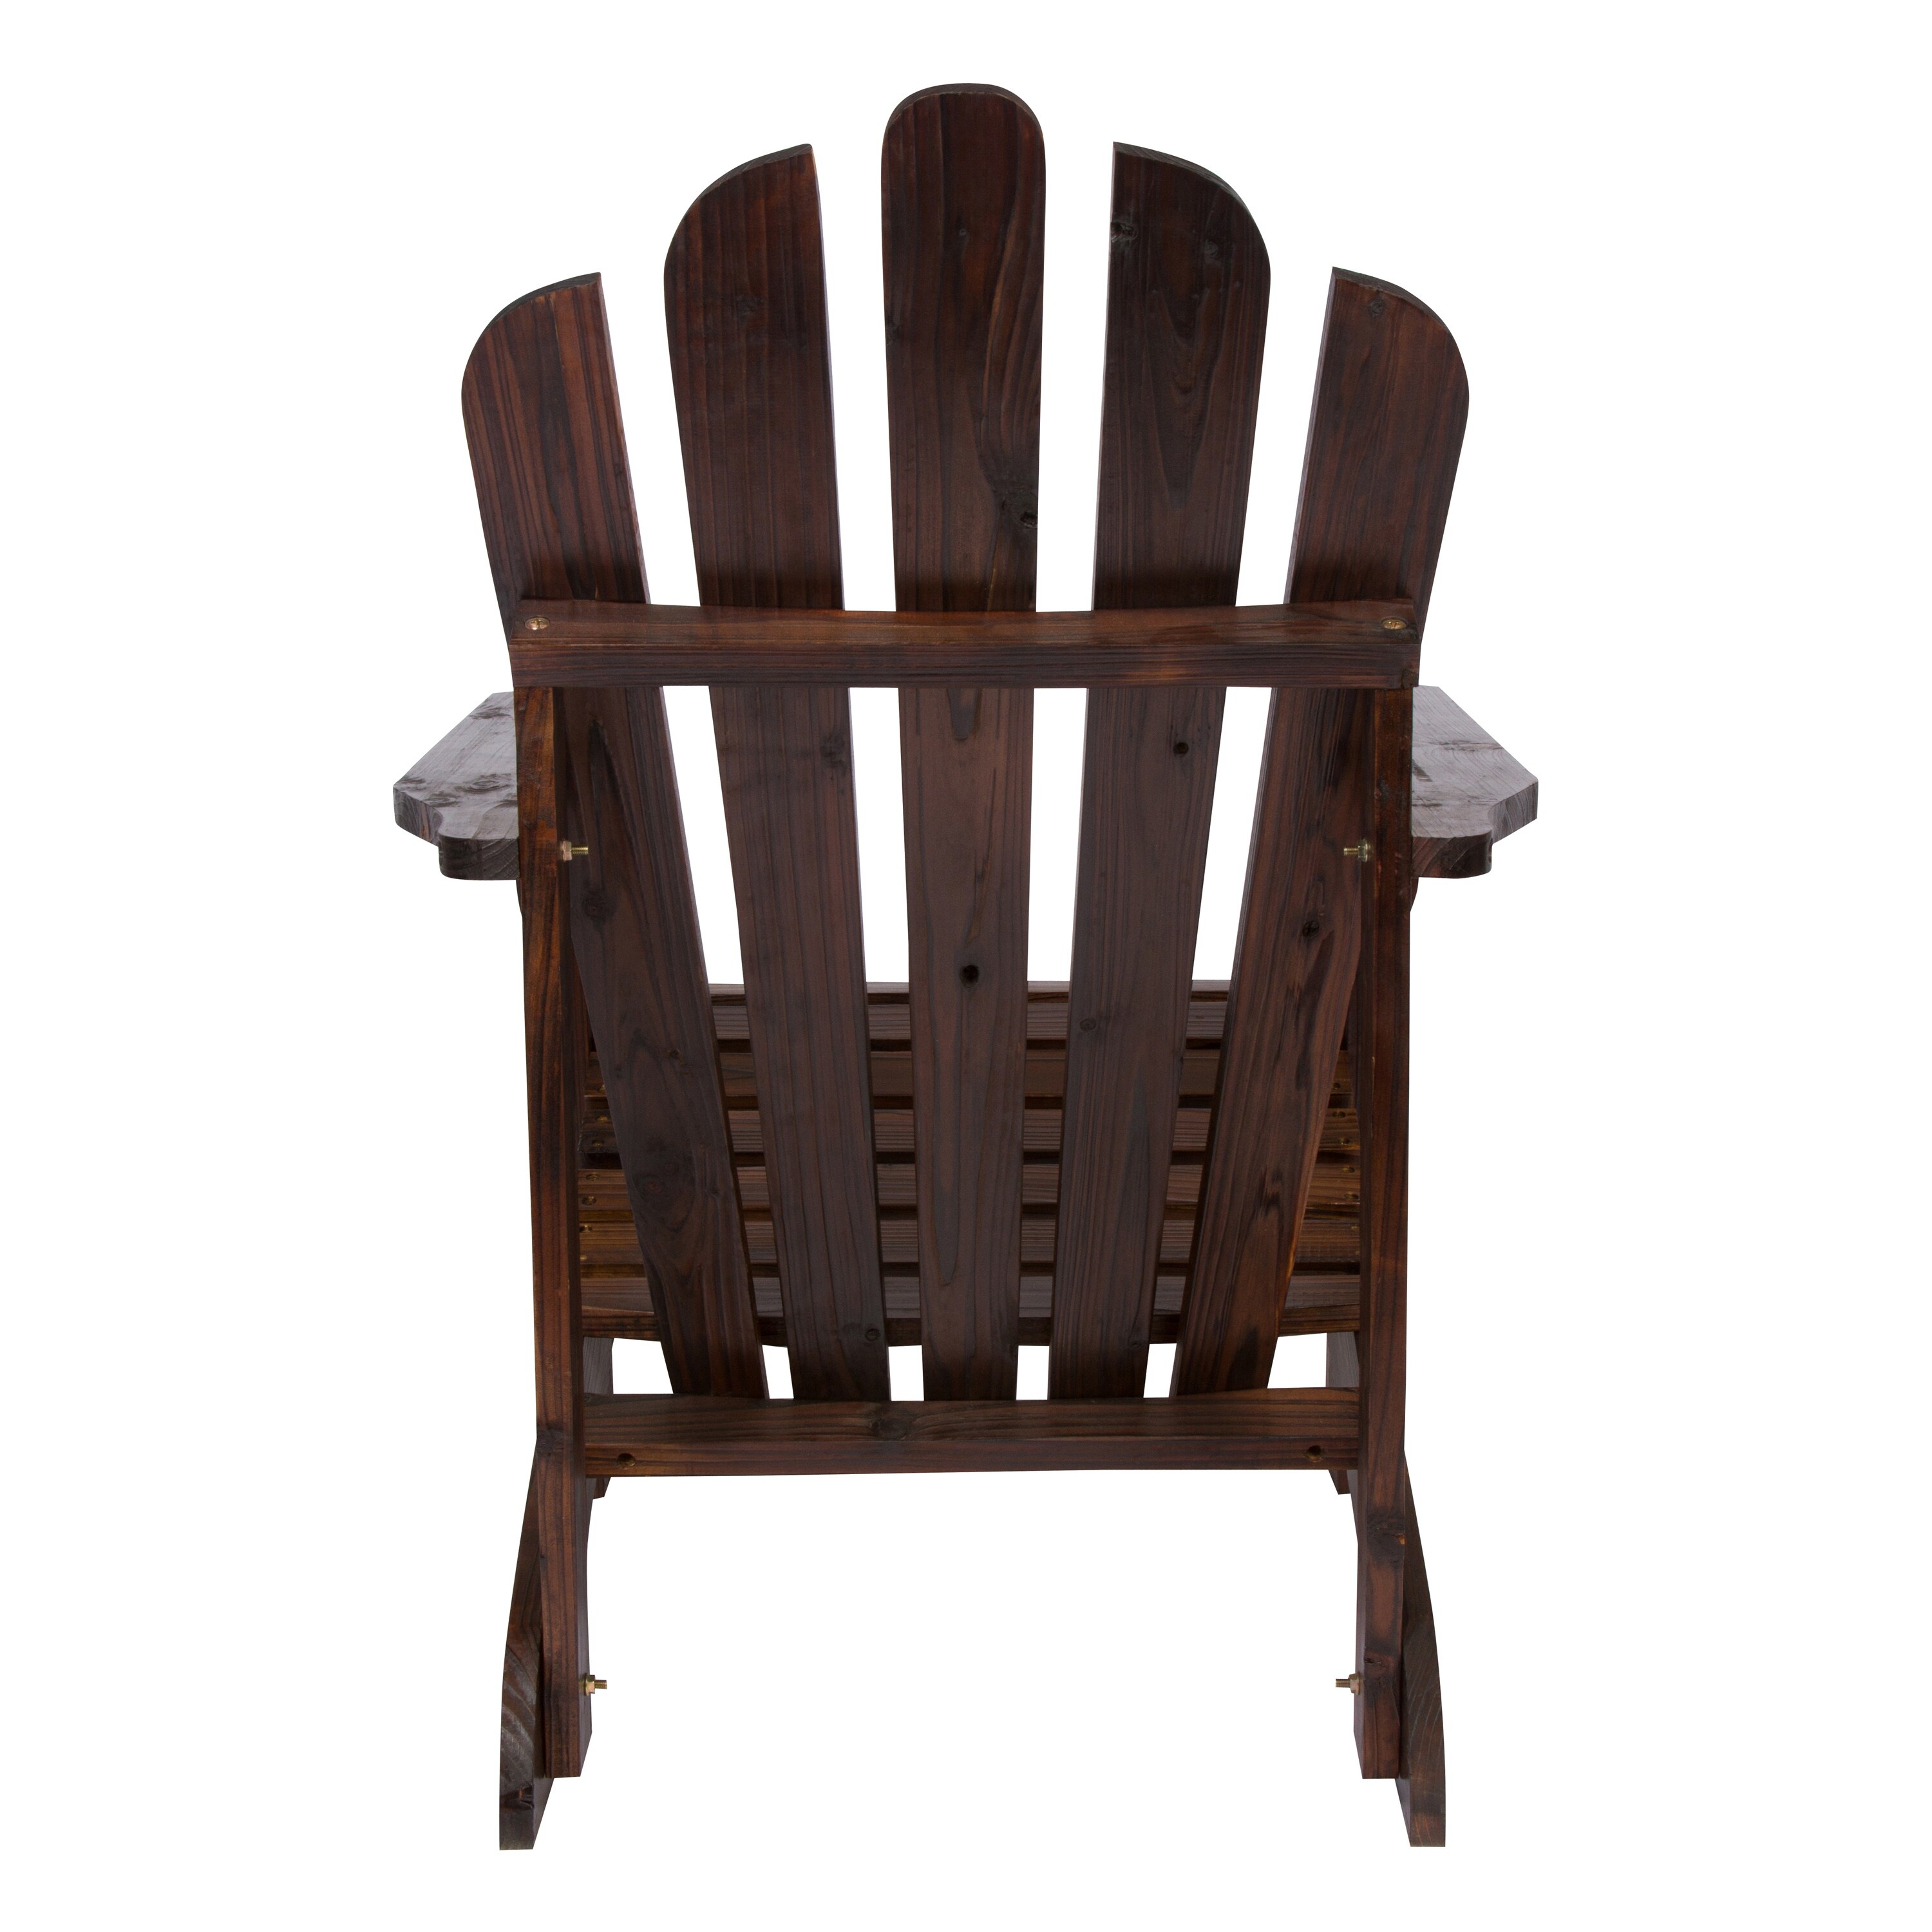 Remedy Wood Adirondack Chair and Folding Table Set